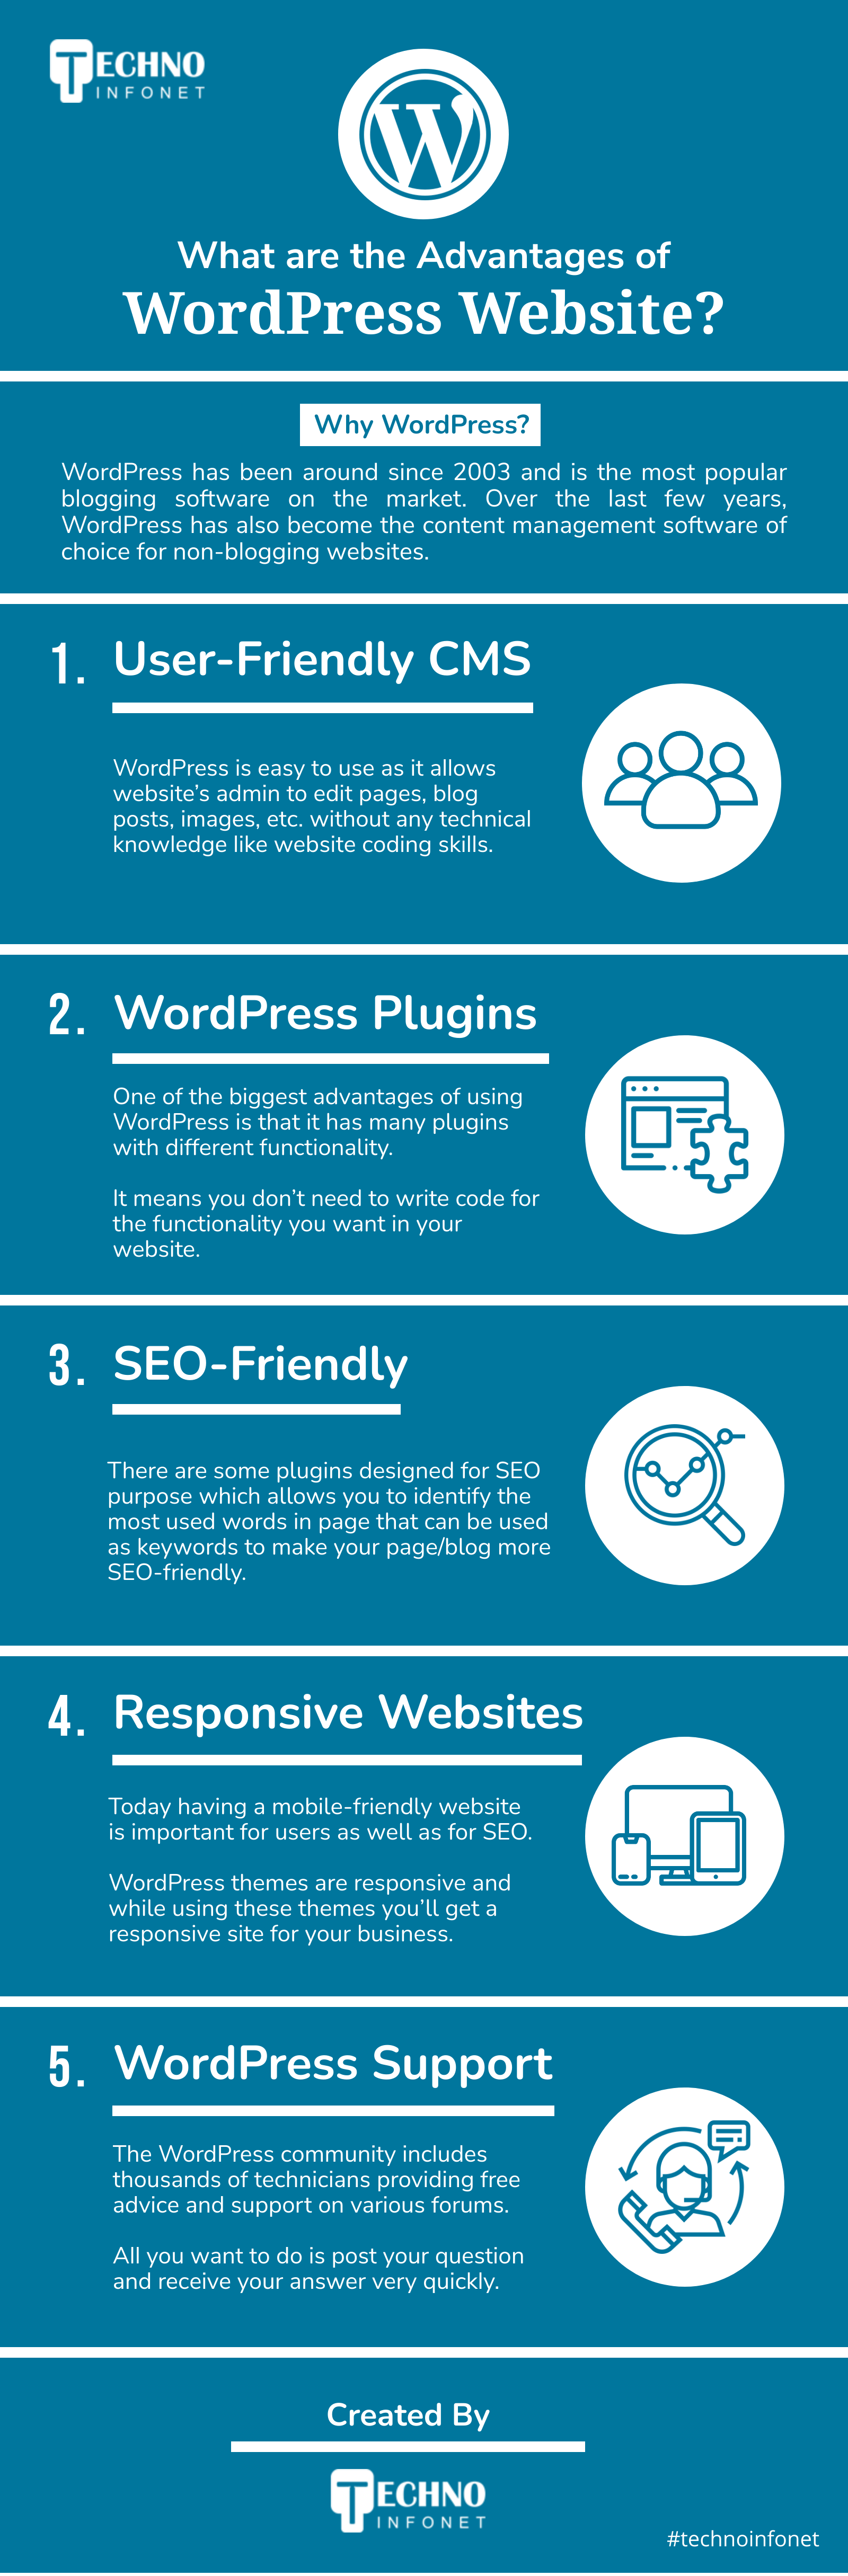 What are the Advantages of WordPress Website?